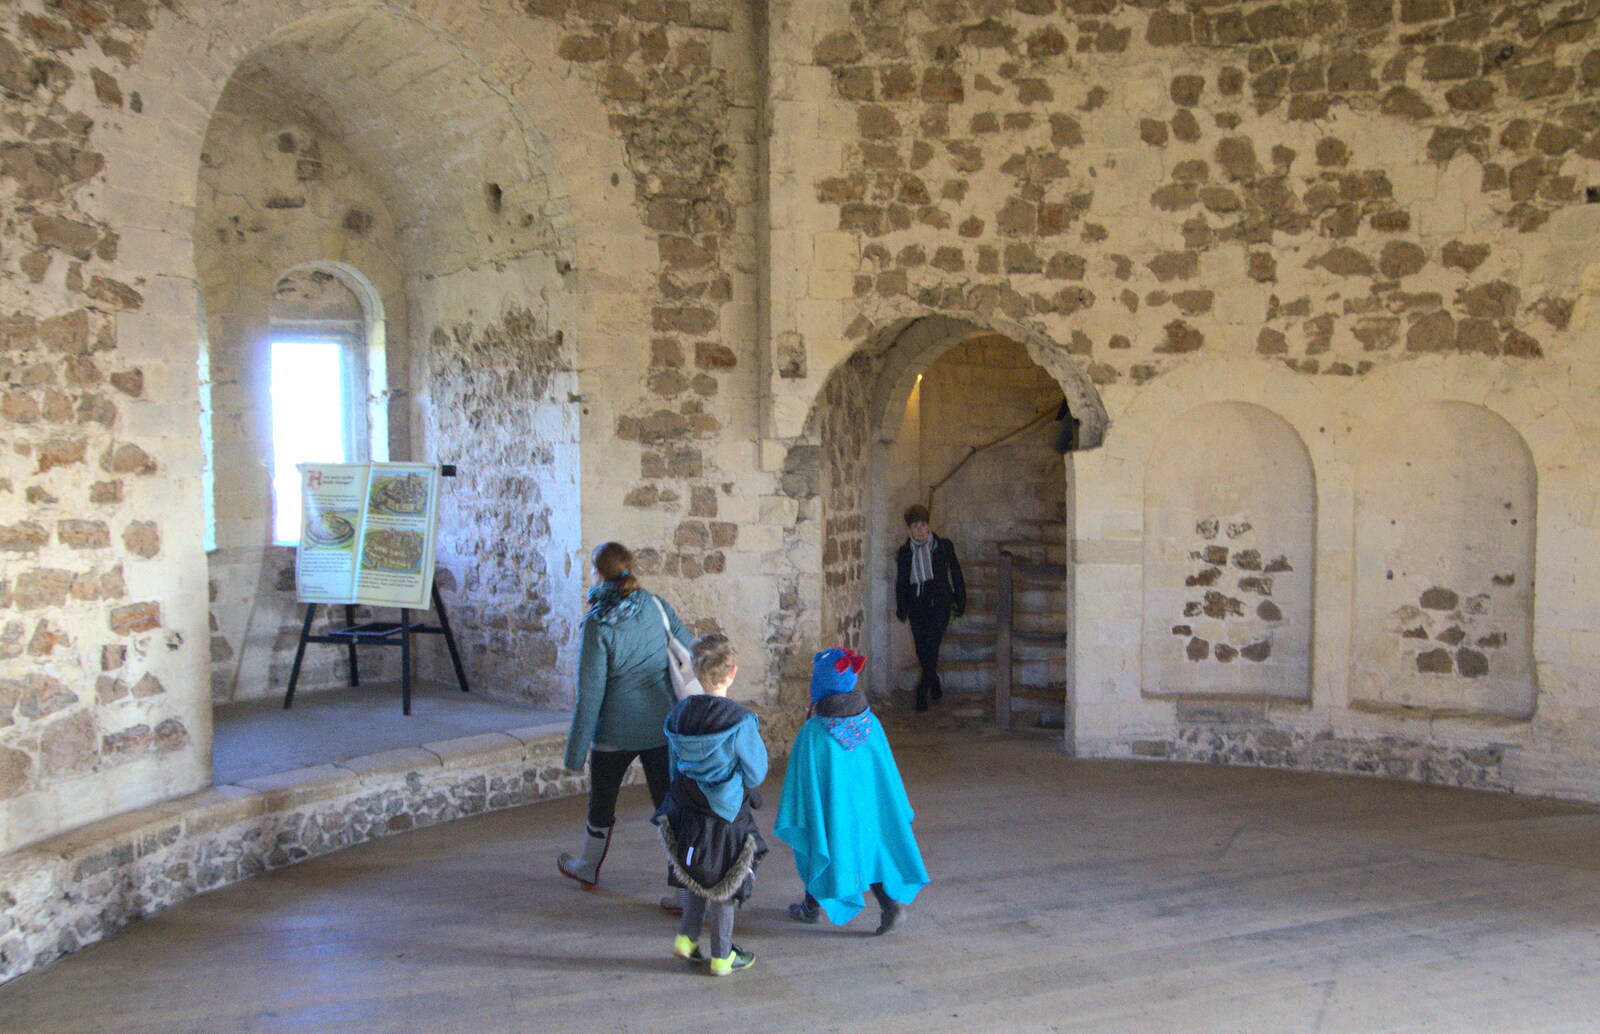 The gang roam around inside Orford castle from An Orford Day Out, Orford, Suffolk - 17th February 2018